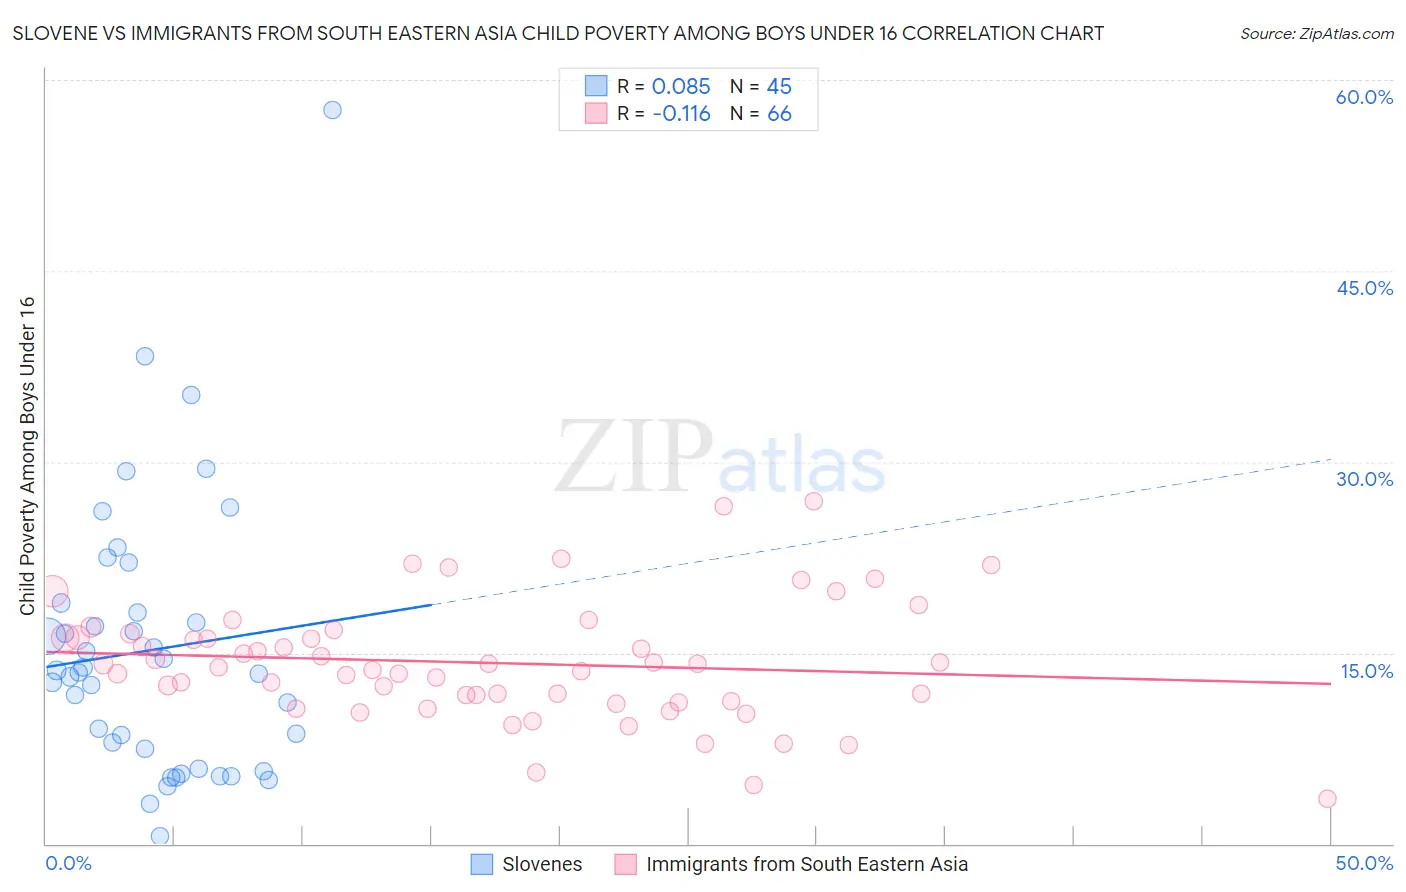 Slovene vs Immigrants from South Eastern Asia Child Poverty Among Boys Under 16